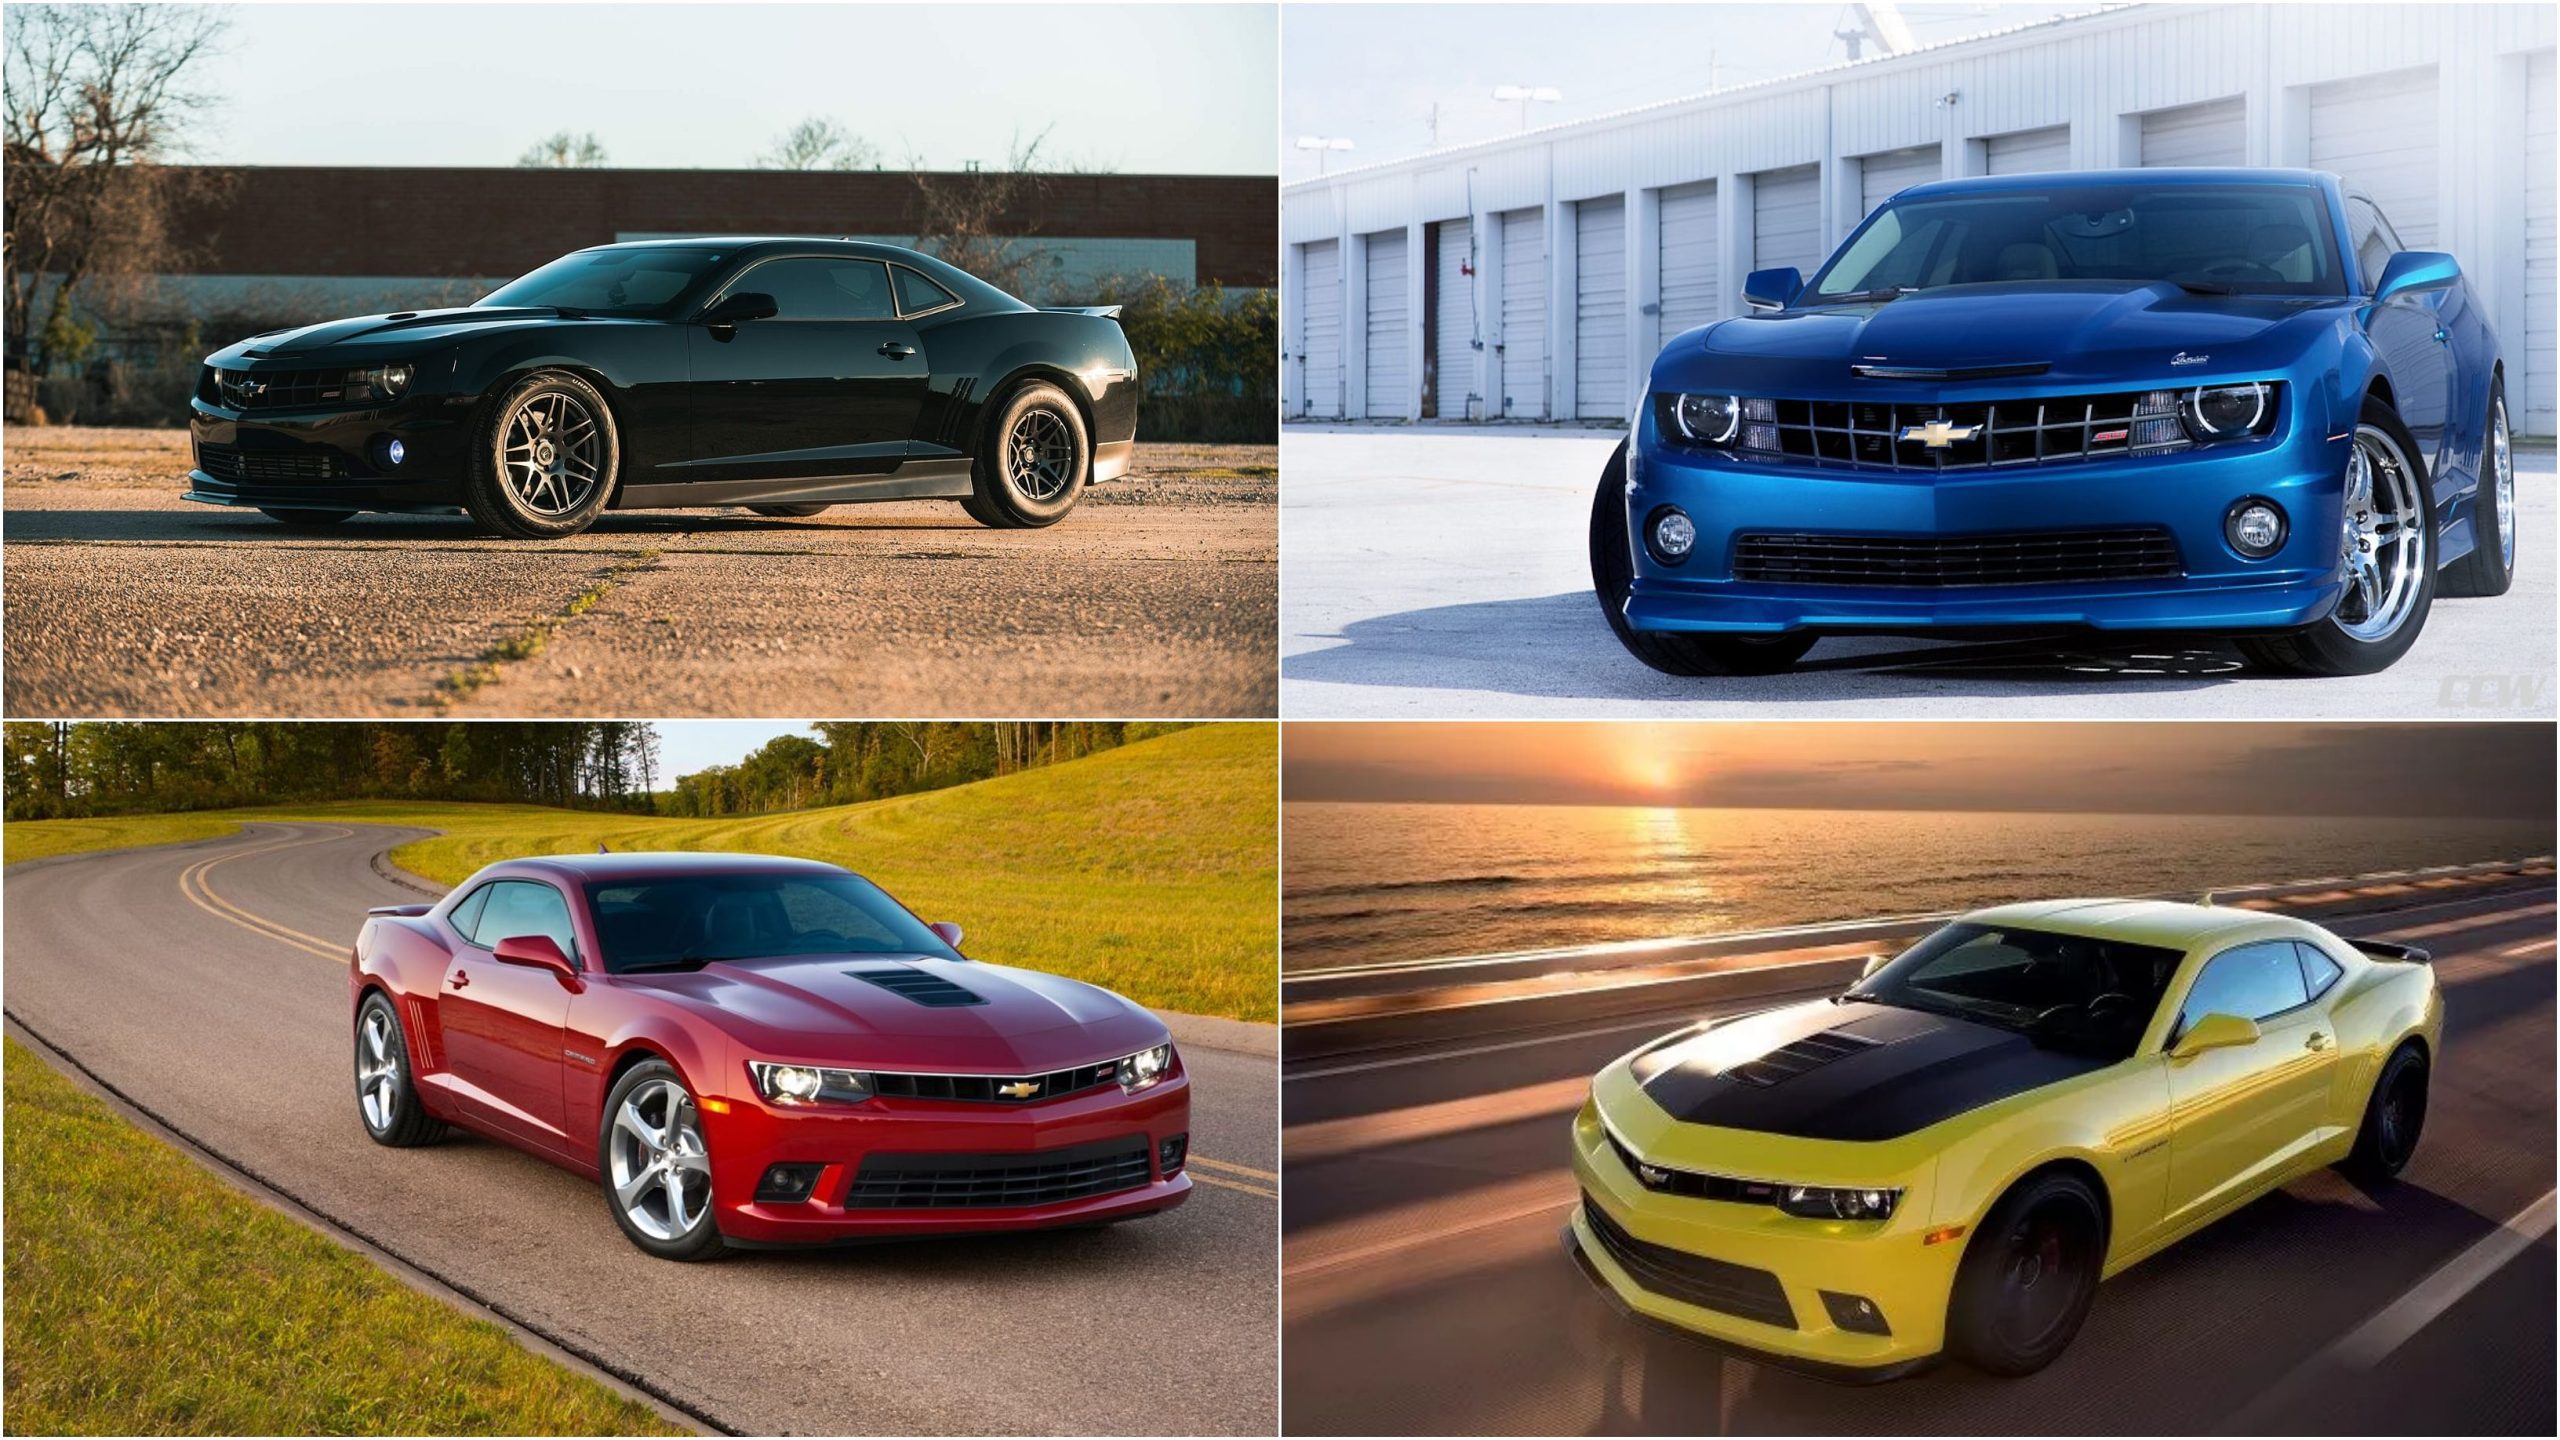 The 5th Generation Chevrolet Camaro, A Retro Muscle Car with Modern Performance